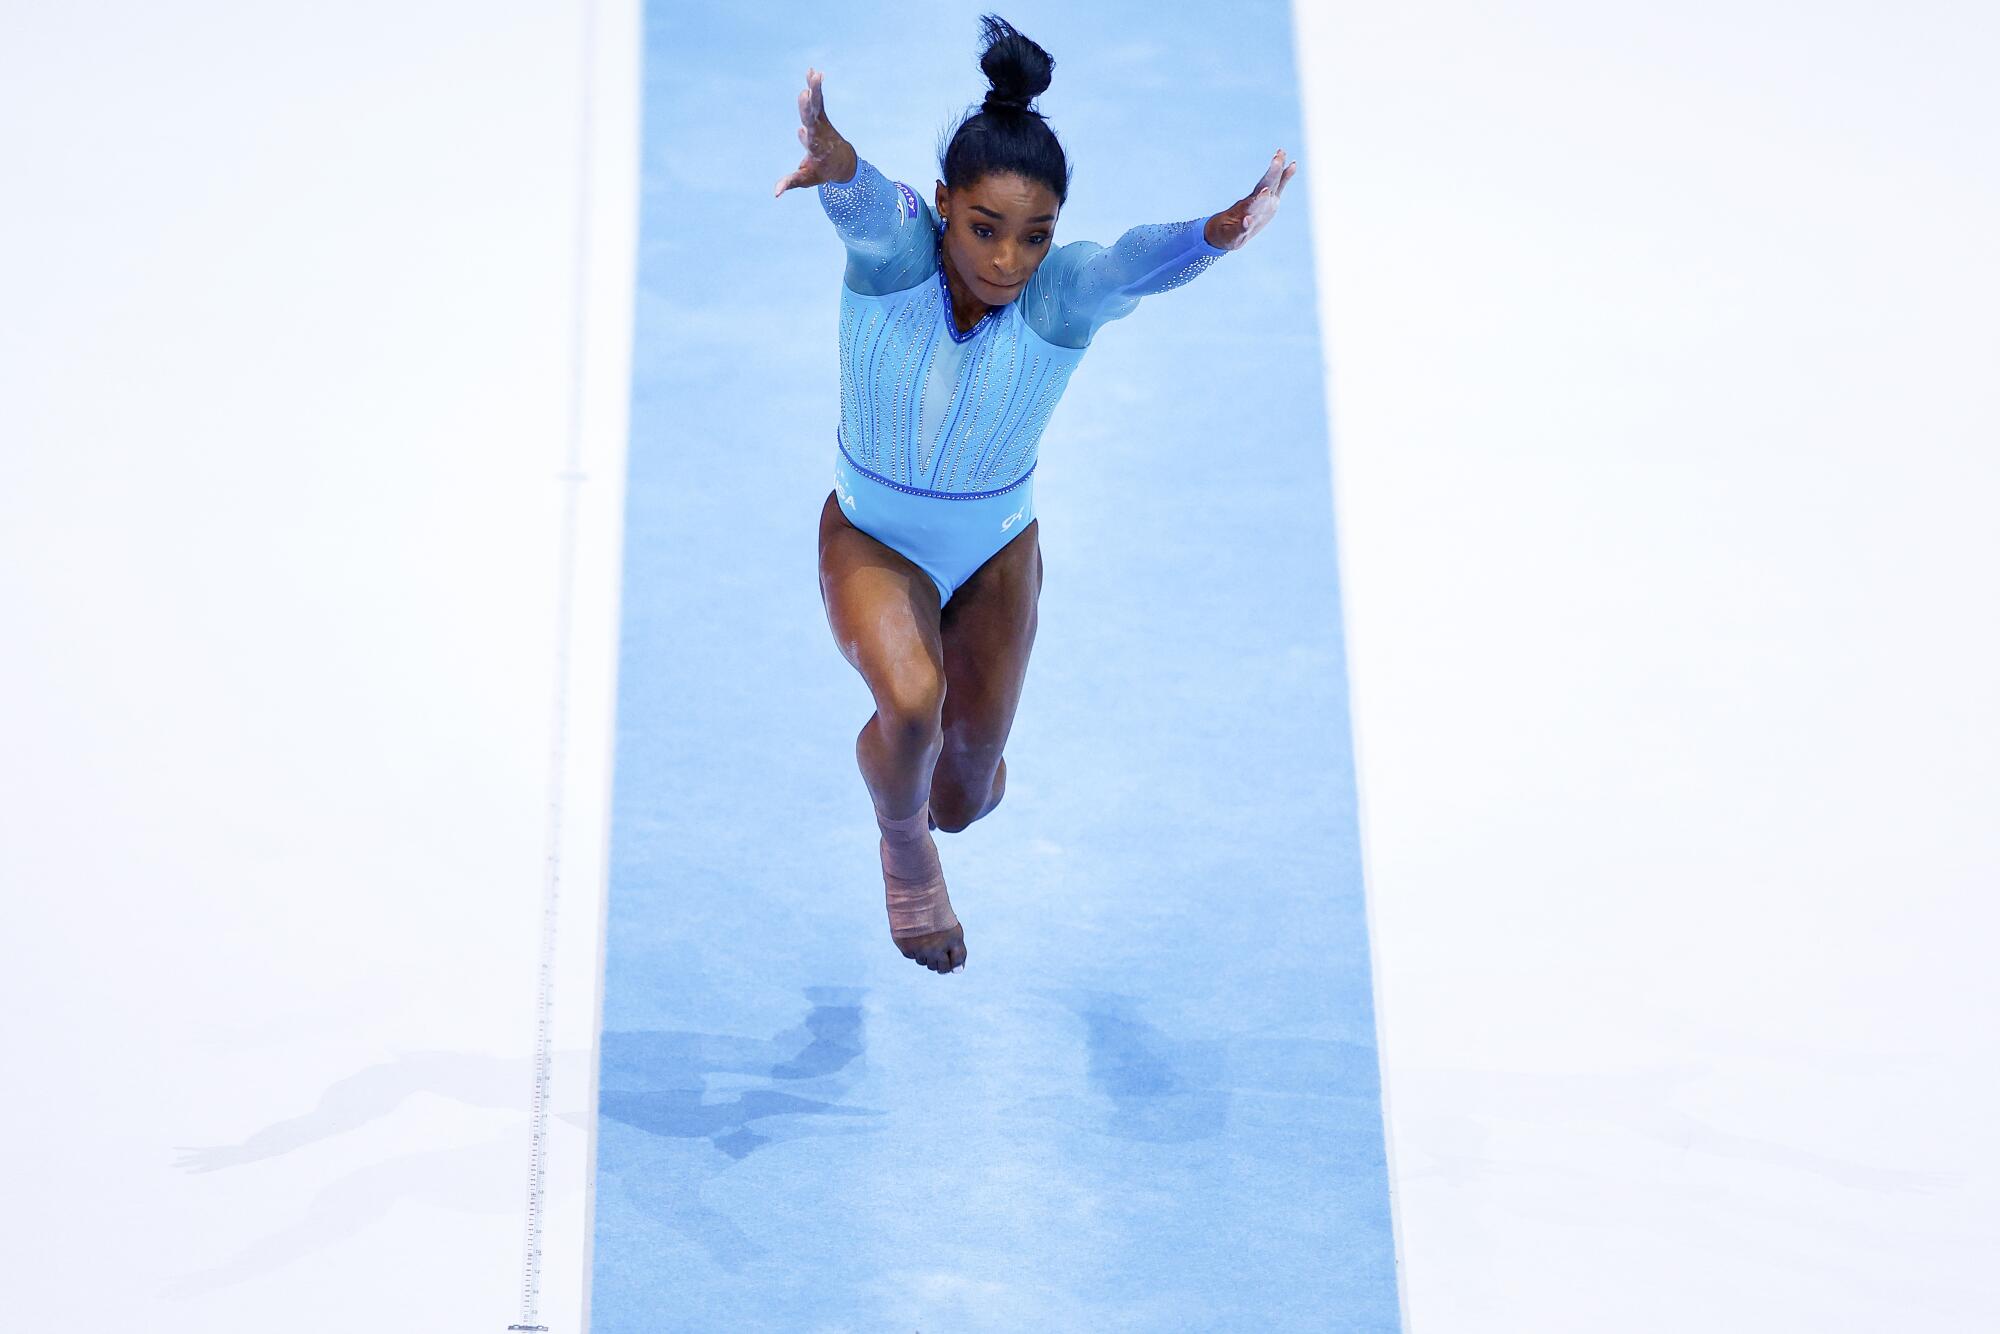 Simone Biles competes in the vault during the women's qualifying session in Belgium in 2023.